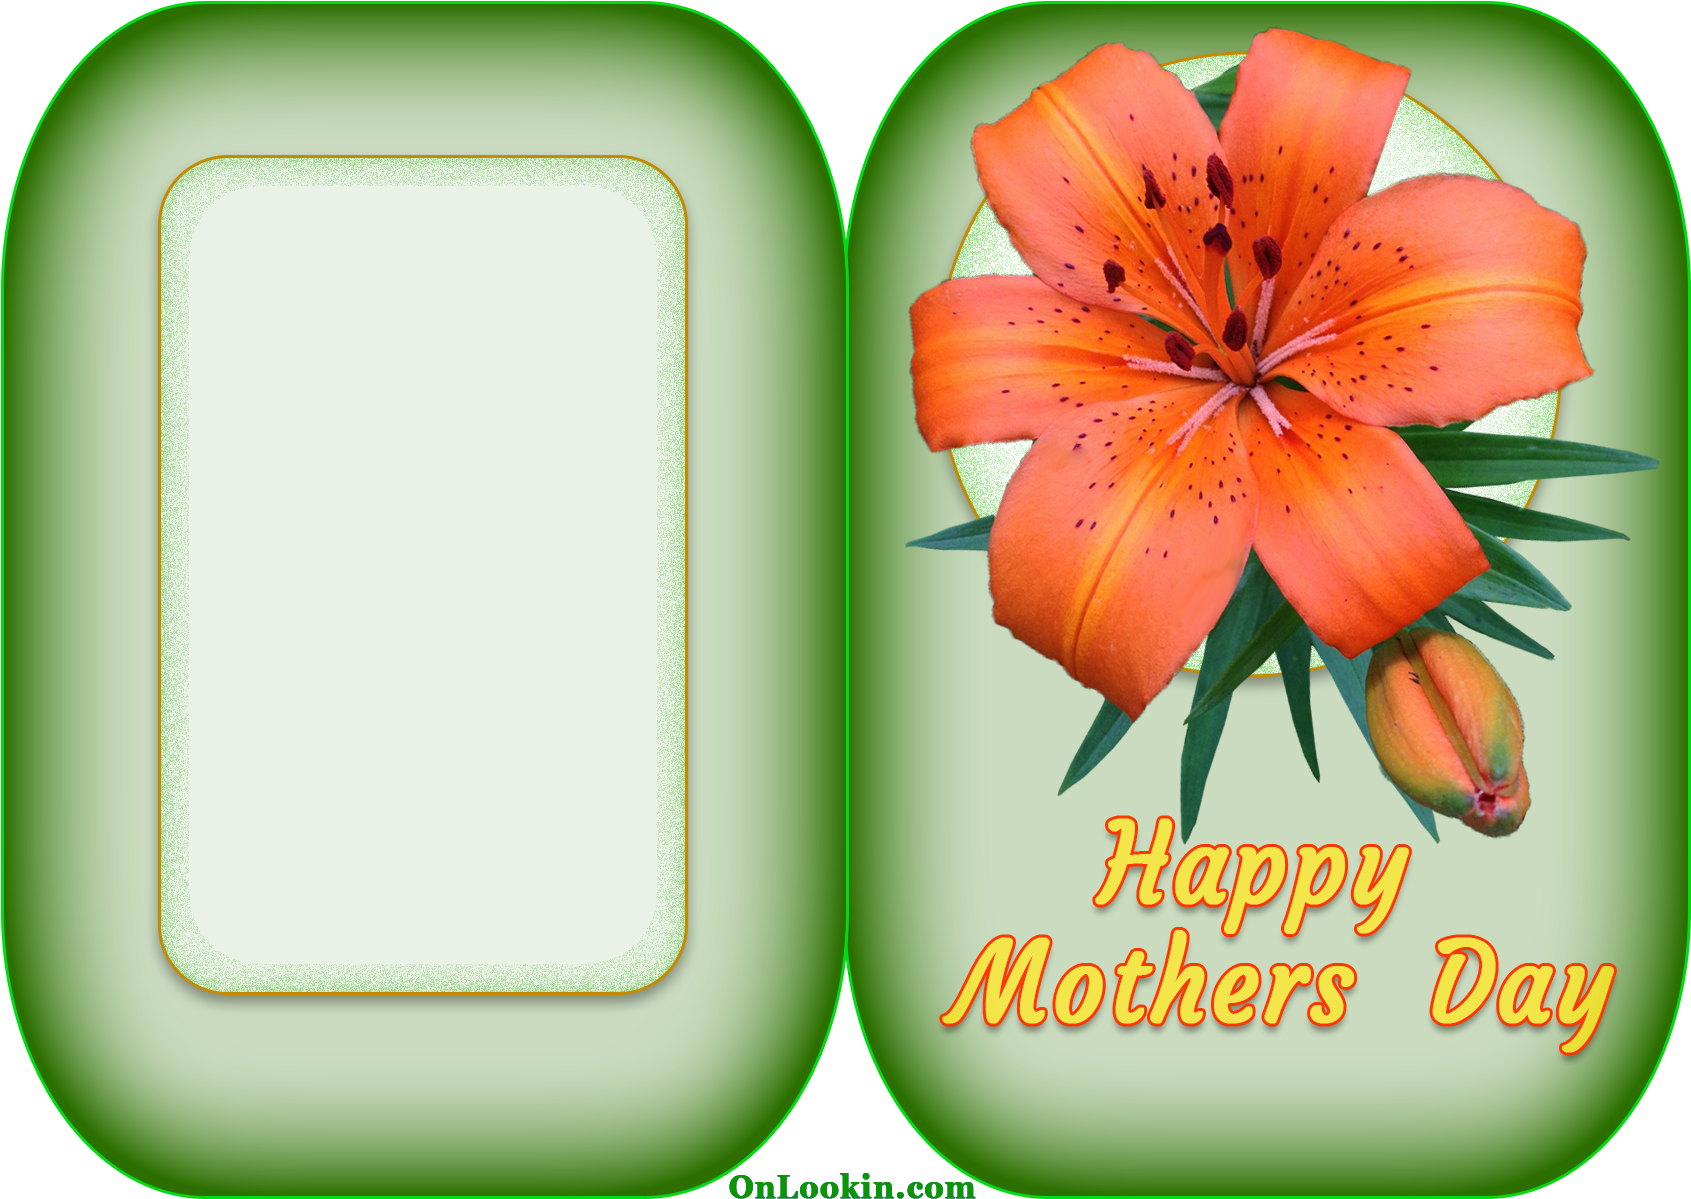 Happy Mothers Day Tiger Lily Flower - Happy Mothers Flower Cards (1740x1240)